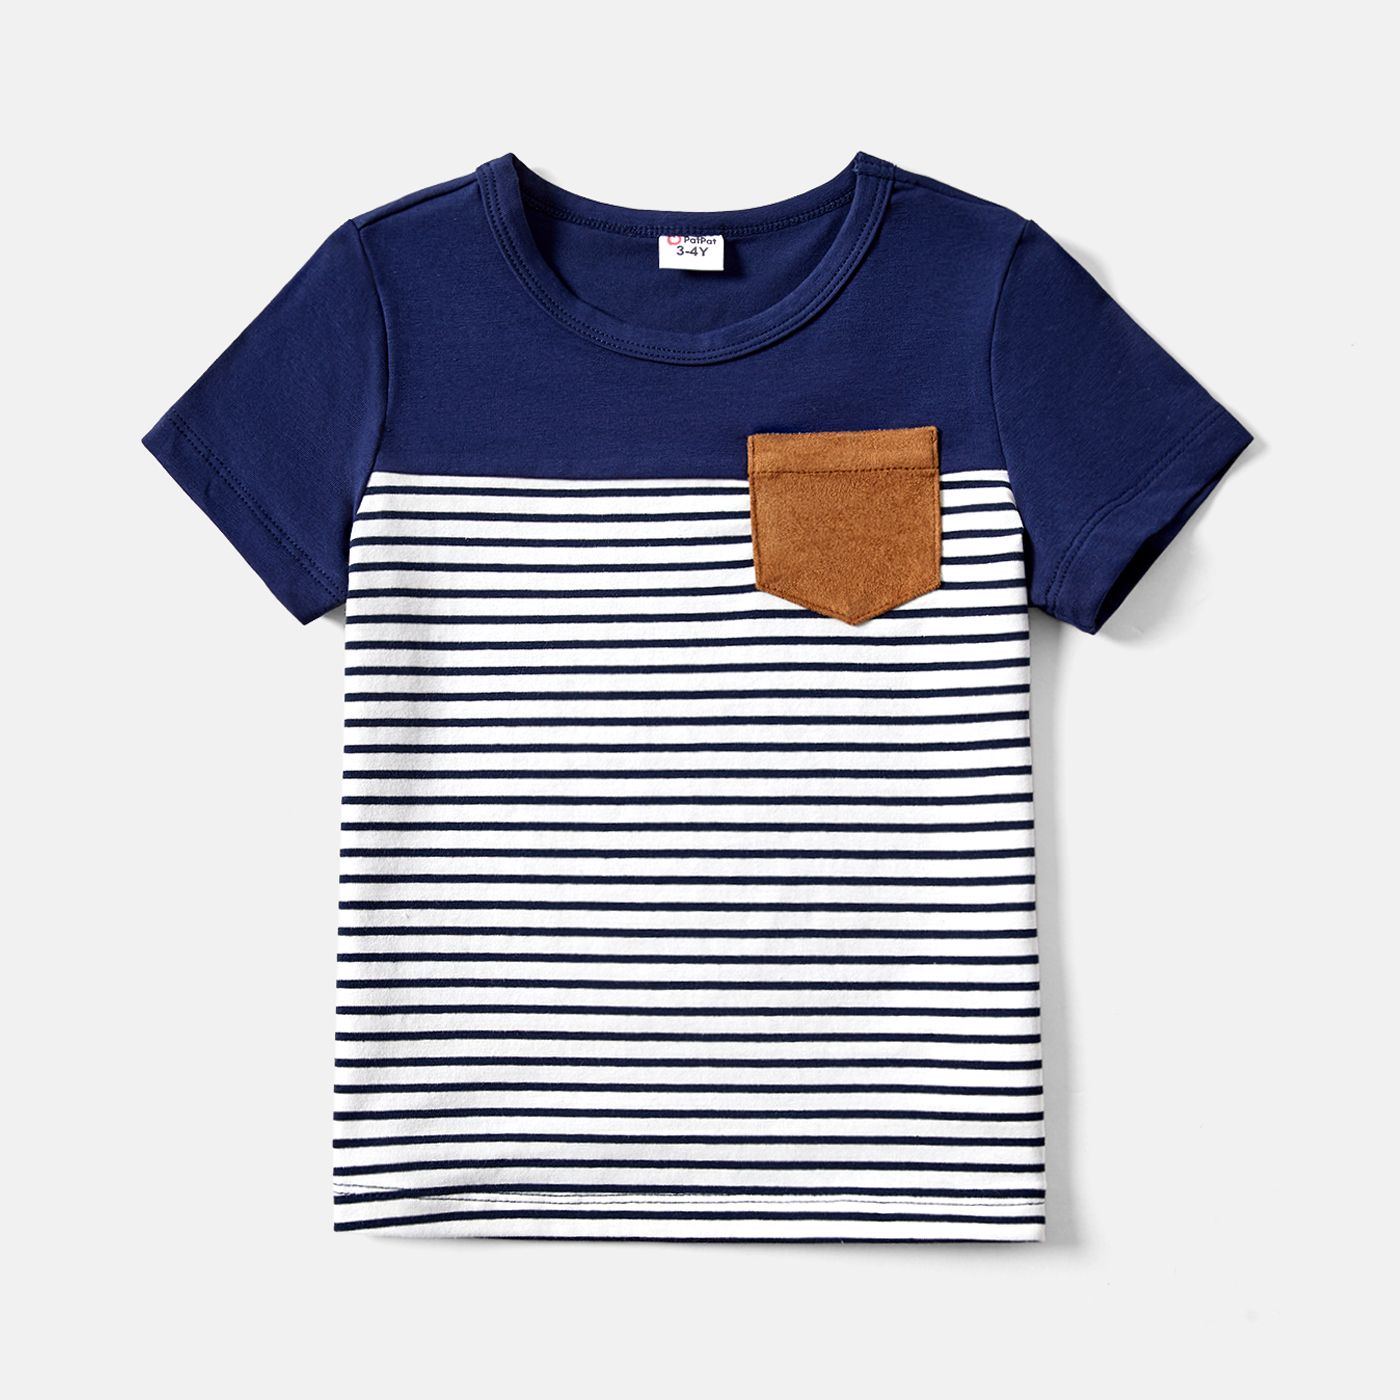 Family Matching 95% Cotton Short-sleeve Colorblock Striped Tee